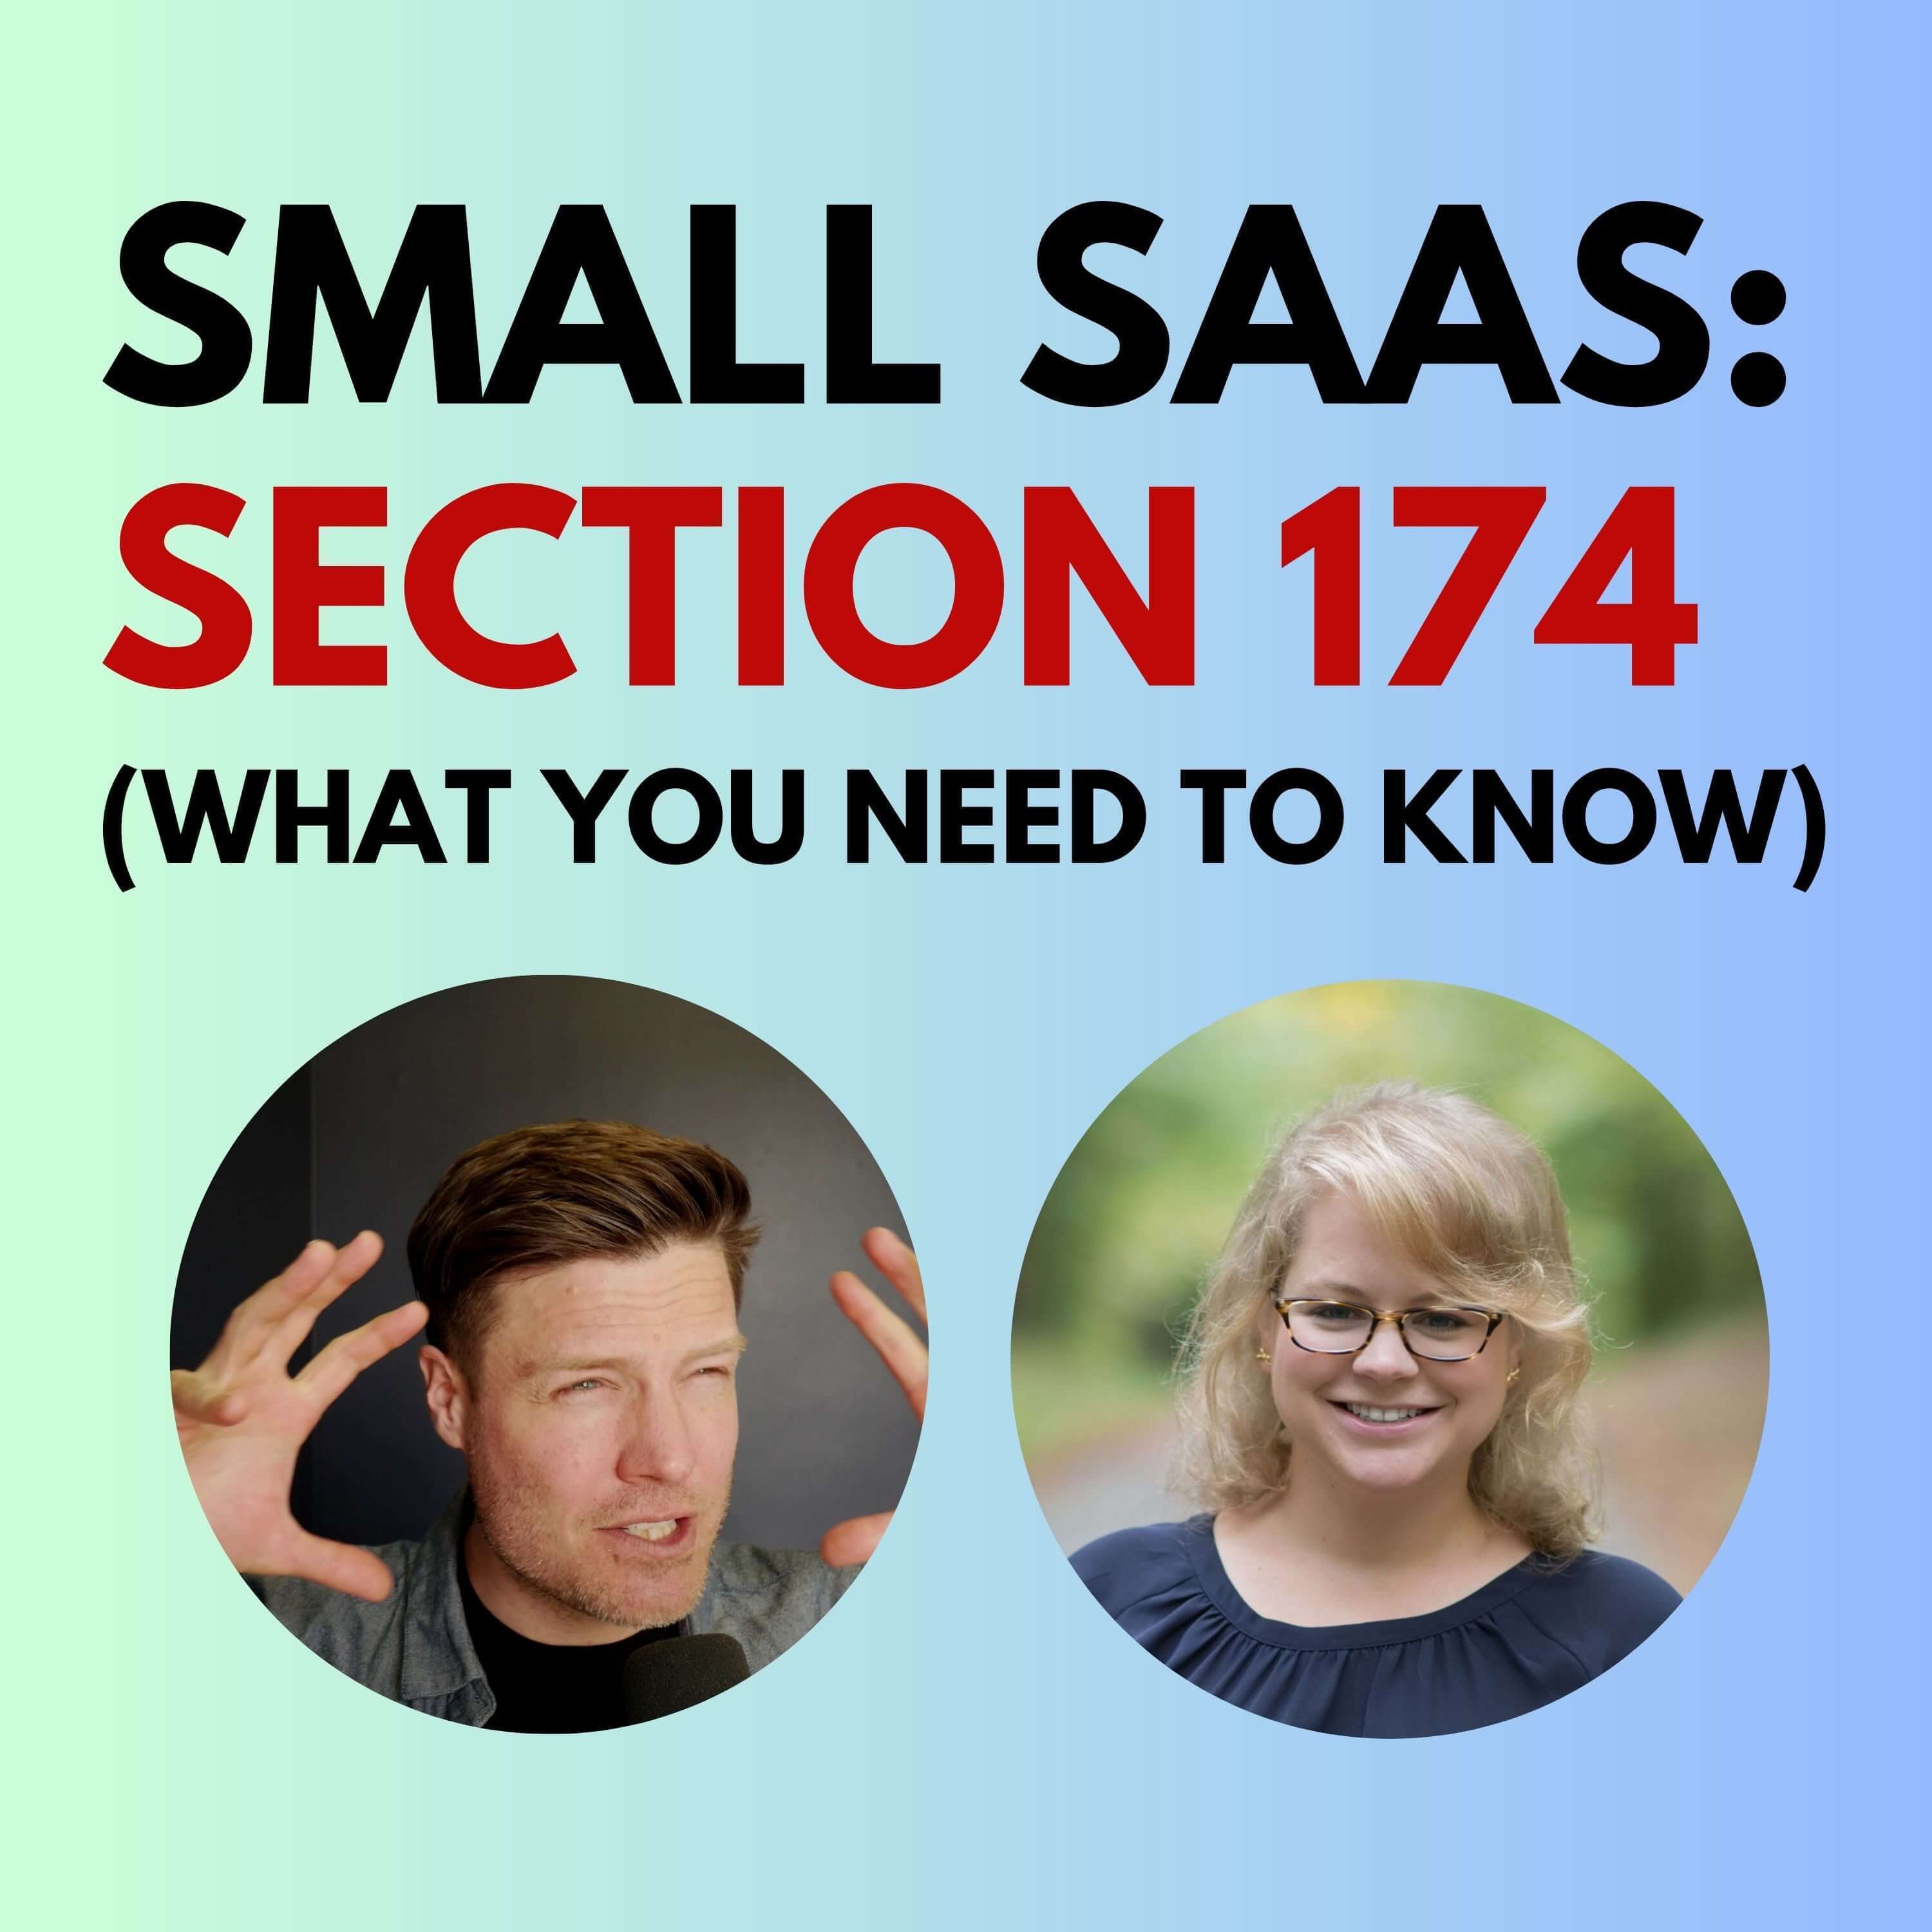 Act now before it's too late: Section 174